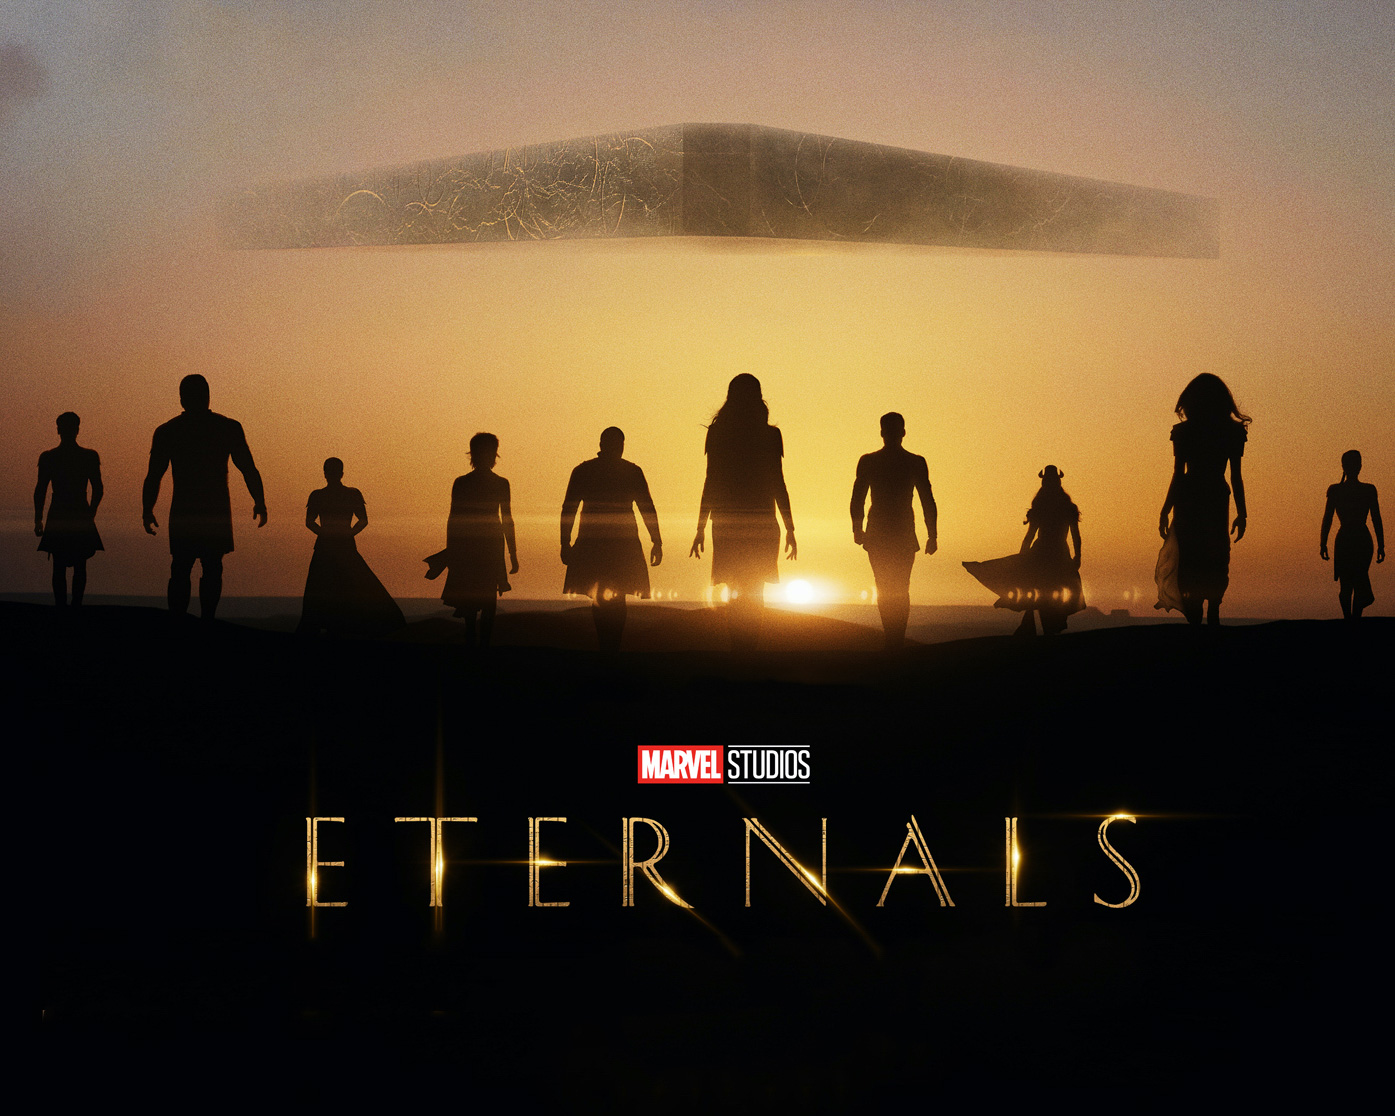 Eternals from Marvel Studios now available to stream on Disney+ in IMAX enhanced